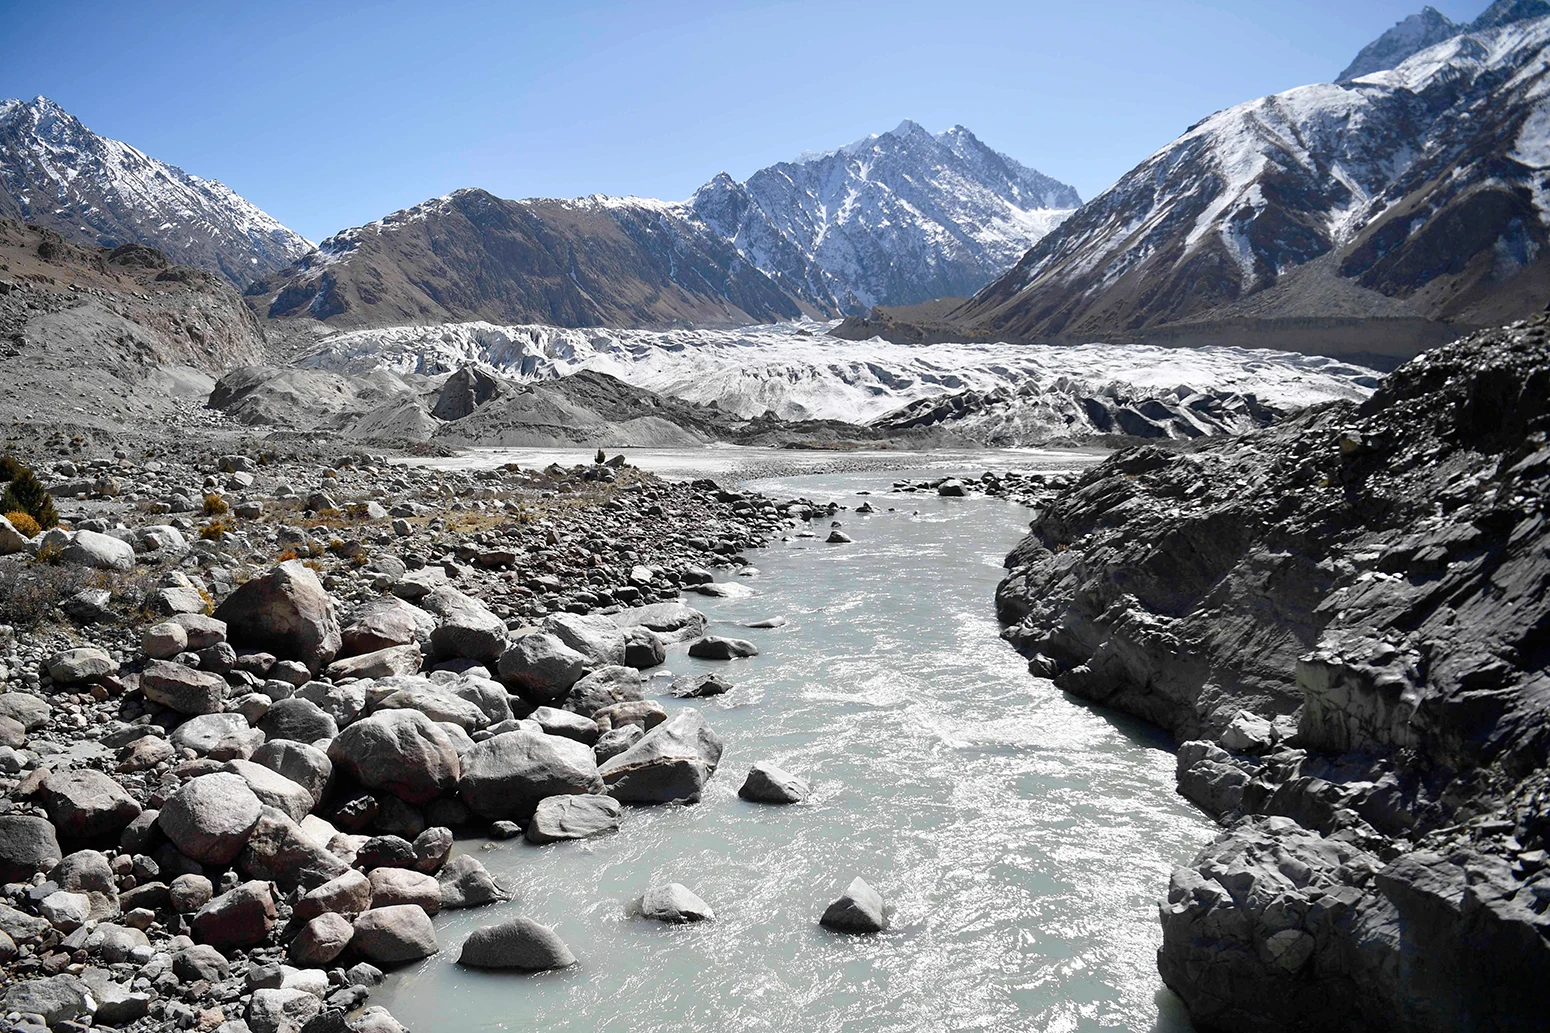 The Chiatibo glacier in the Hindu Kush mountain range in the Chitral District of Khyber-Pakhunkwa Province in Pakistan.